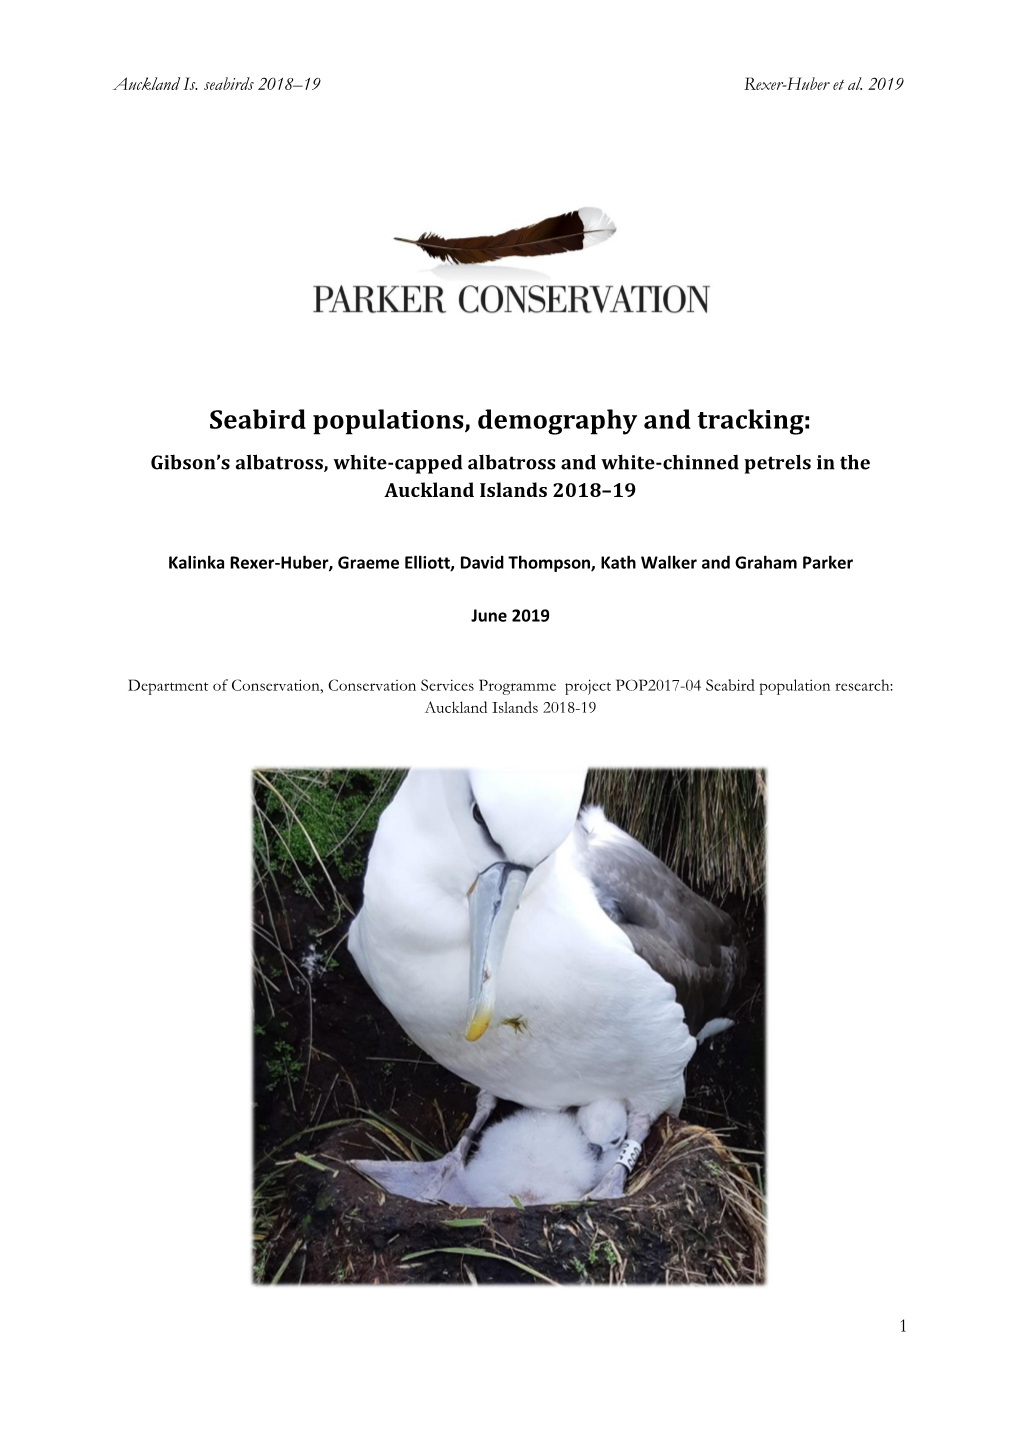 Seabird Populations, Demography and Tracking: Gibson’S Albatross, White-Capped Albatross and White-Chinned Petrels in the Auckland Islands 2018–19